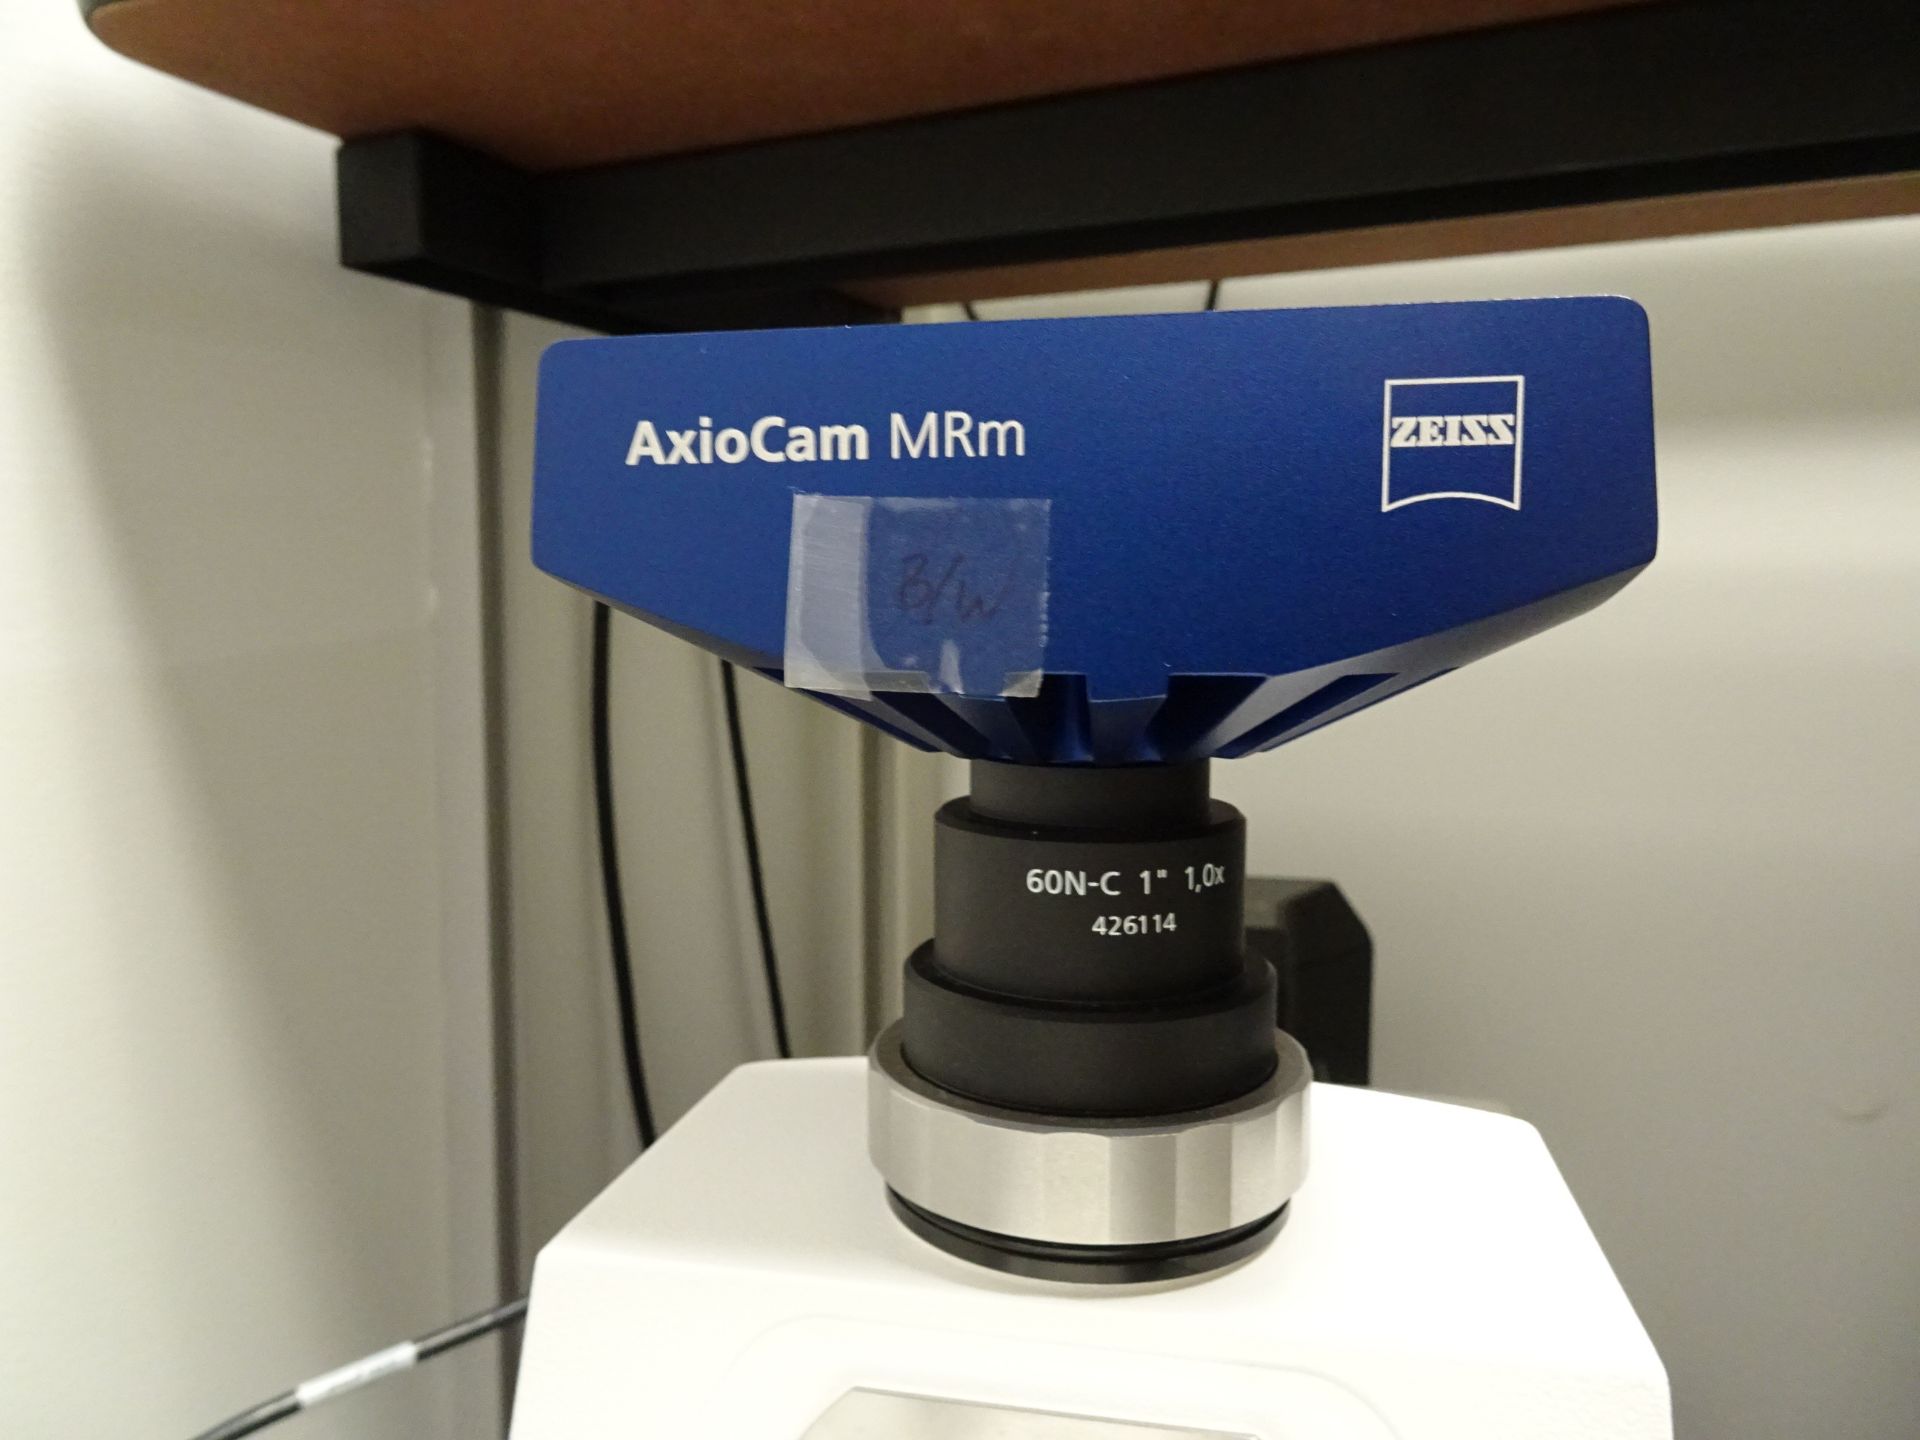 Zeiss Axio Imager.M2 Microscope With AxioCam MRM Camers With 60N-C 1" Camera Adapter, (2) 1PL 10x/23 - Image 8 of 22